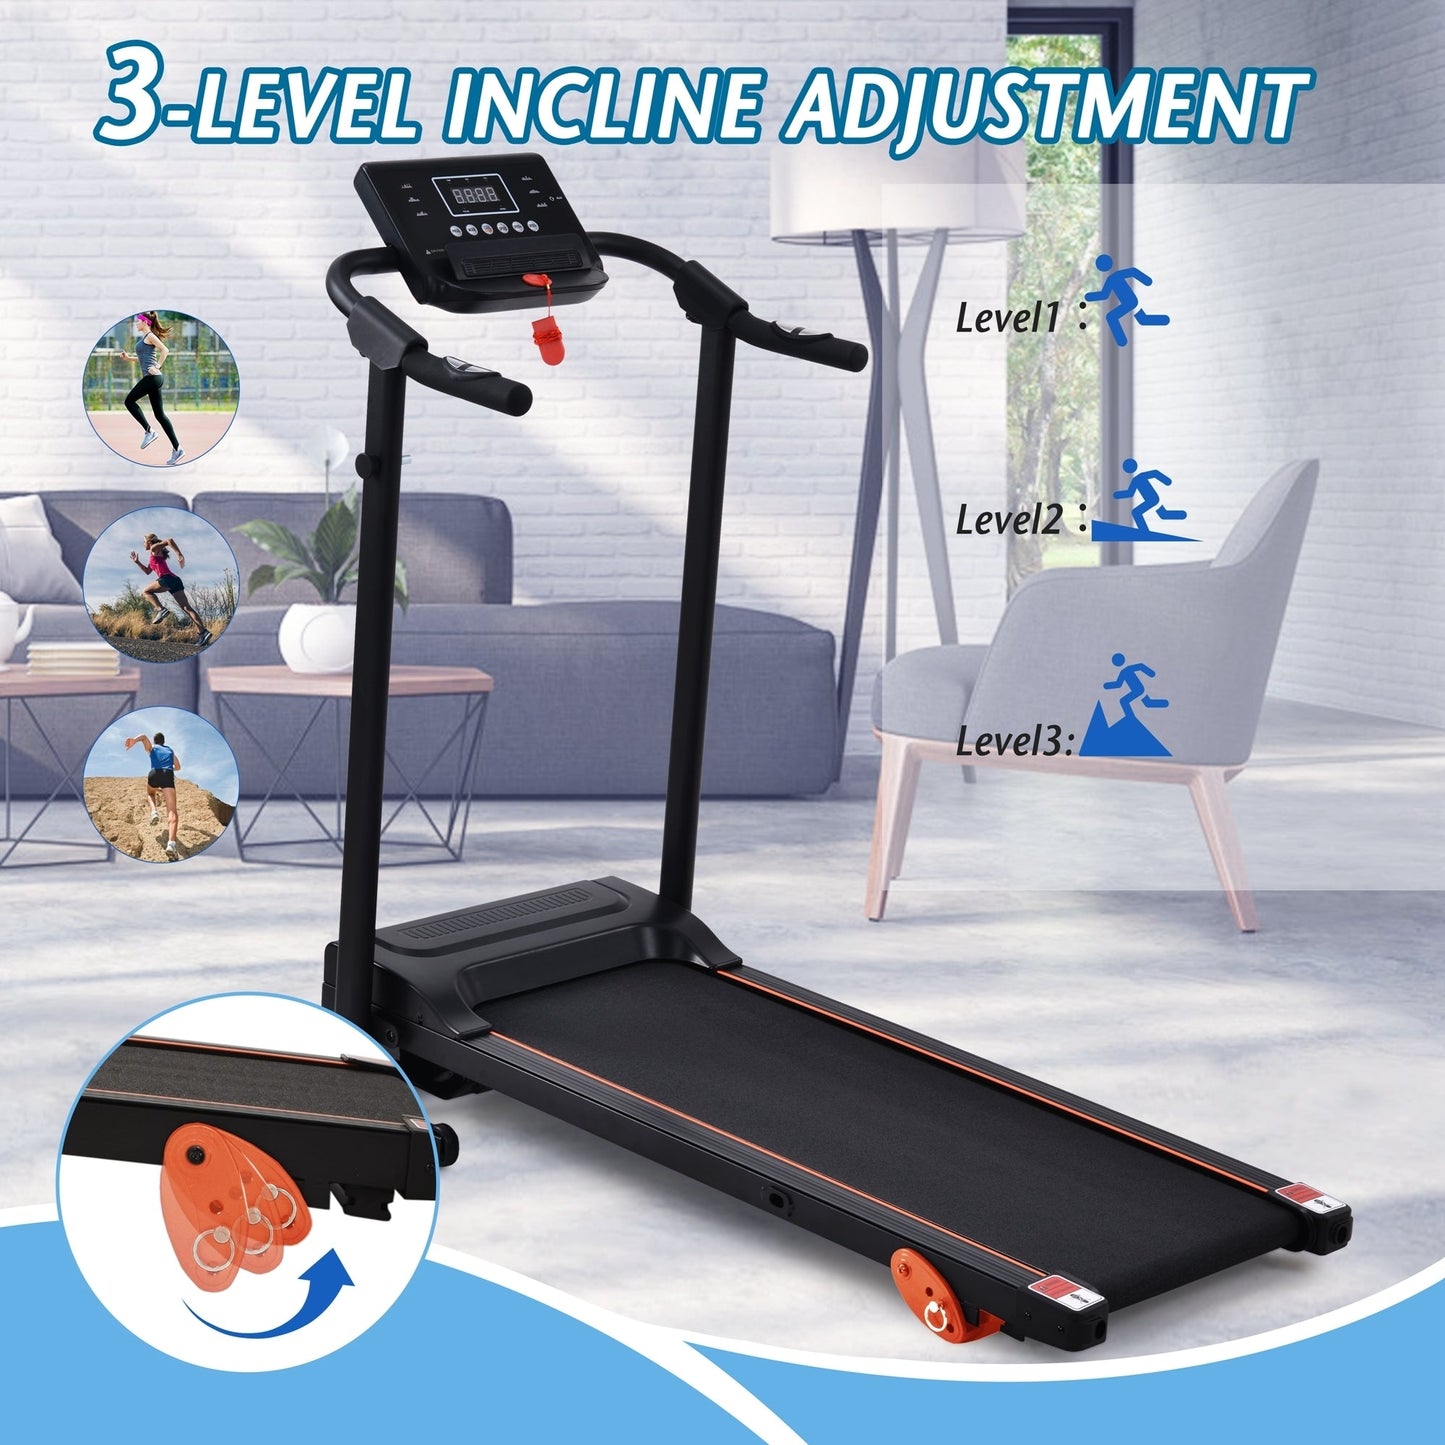 Akutes Electric Foldable Treadmill with Heart Pulse Monitor with Speaker & Incline Adjuster for Home Gym